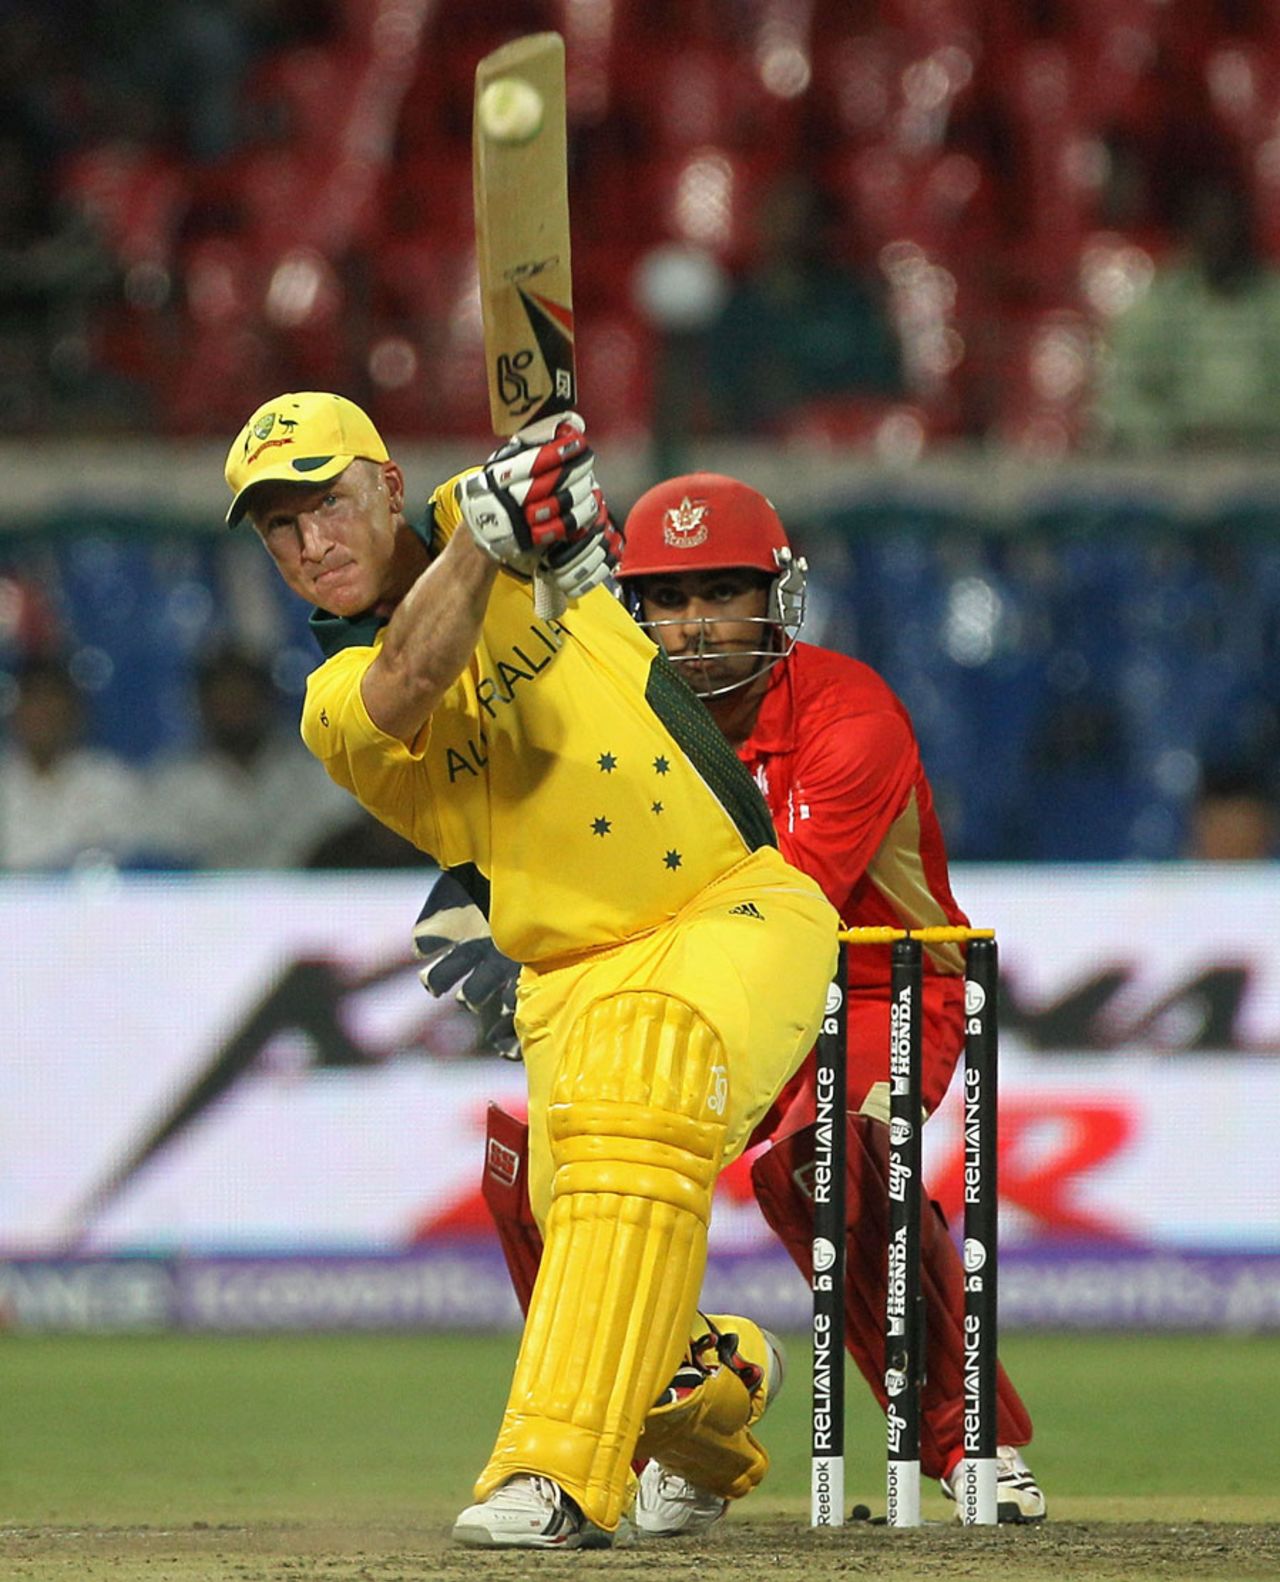 Brad Haddin hits a six over mid-on, Australia v Canada, Group A, World Cup, Bangalore, March 16, 2011